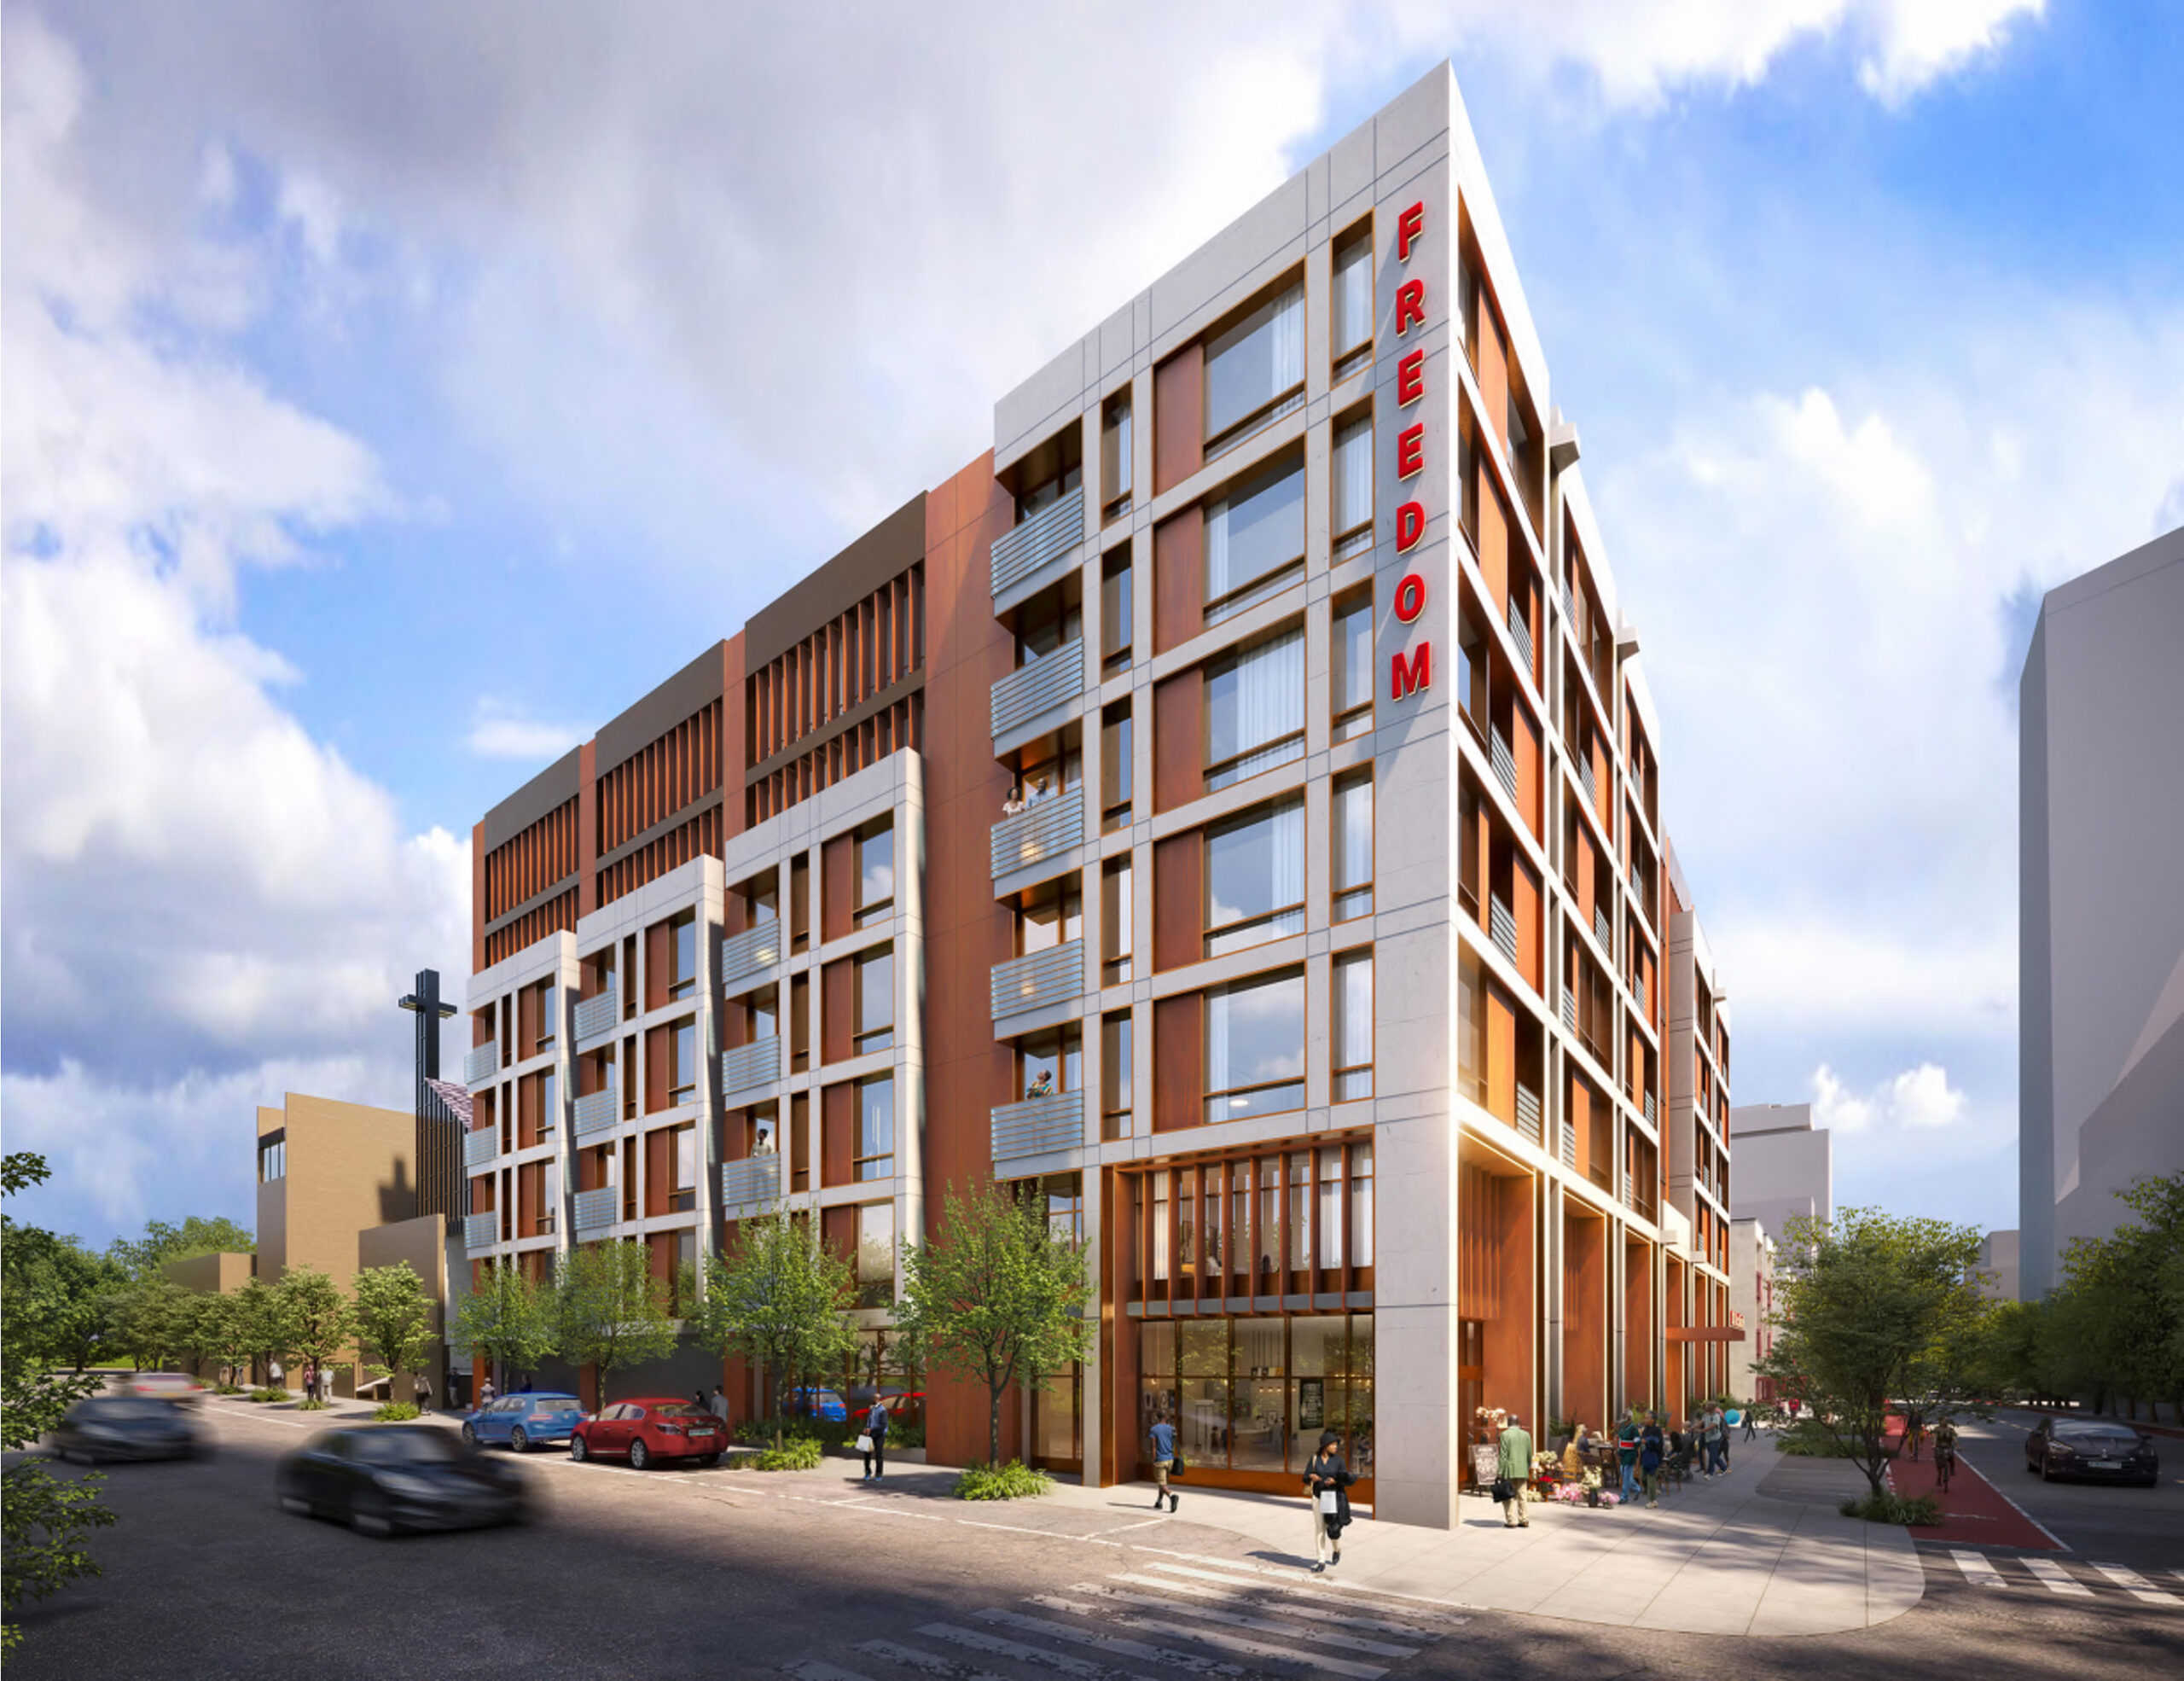 880 McAllister Street, rendering by DLR Group